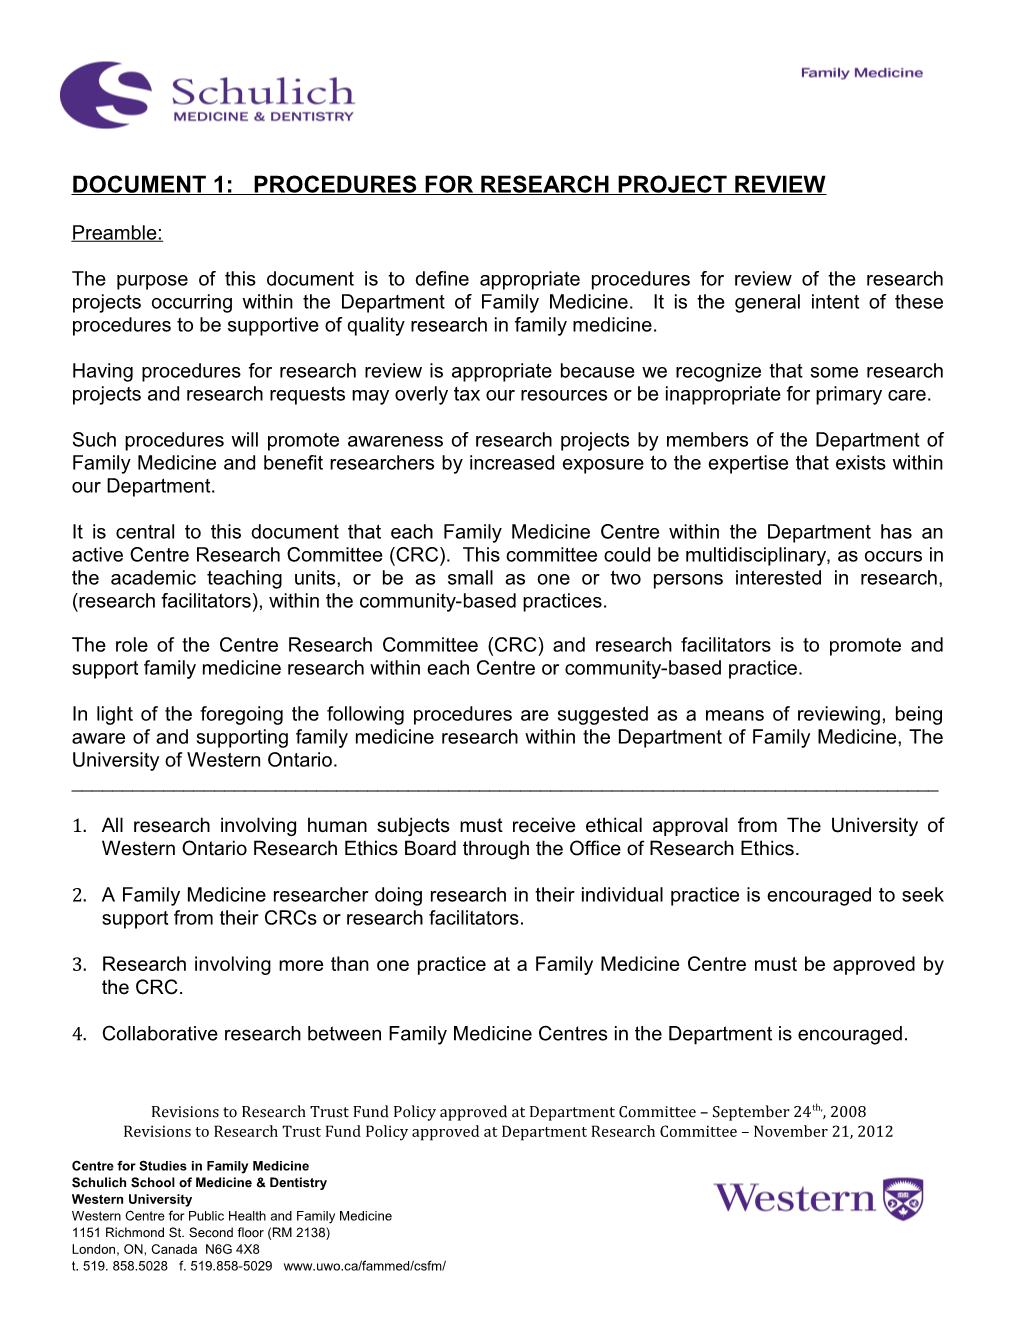 DOCUMENT 1: PROCEDURES for RESEARCH PROJECT REVIEW Page 1 of 2